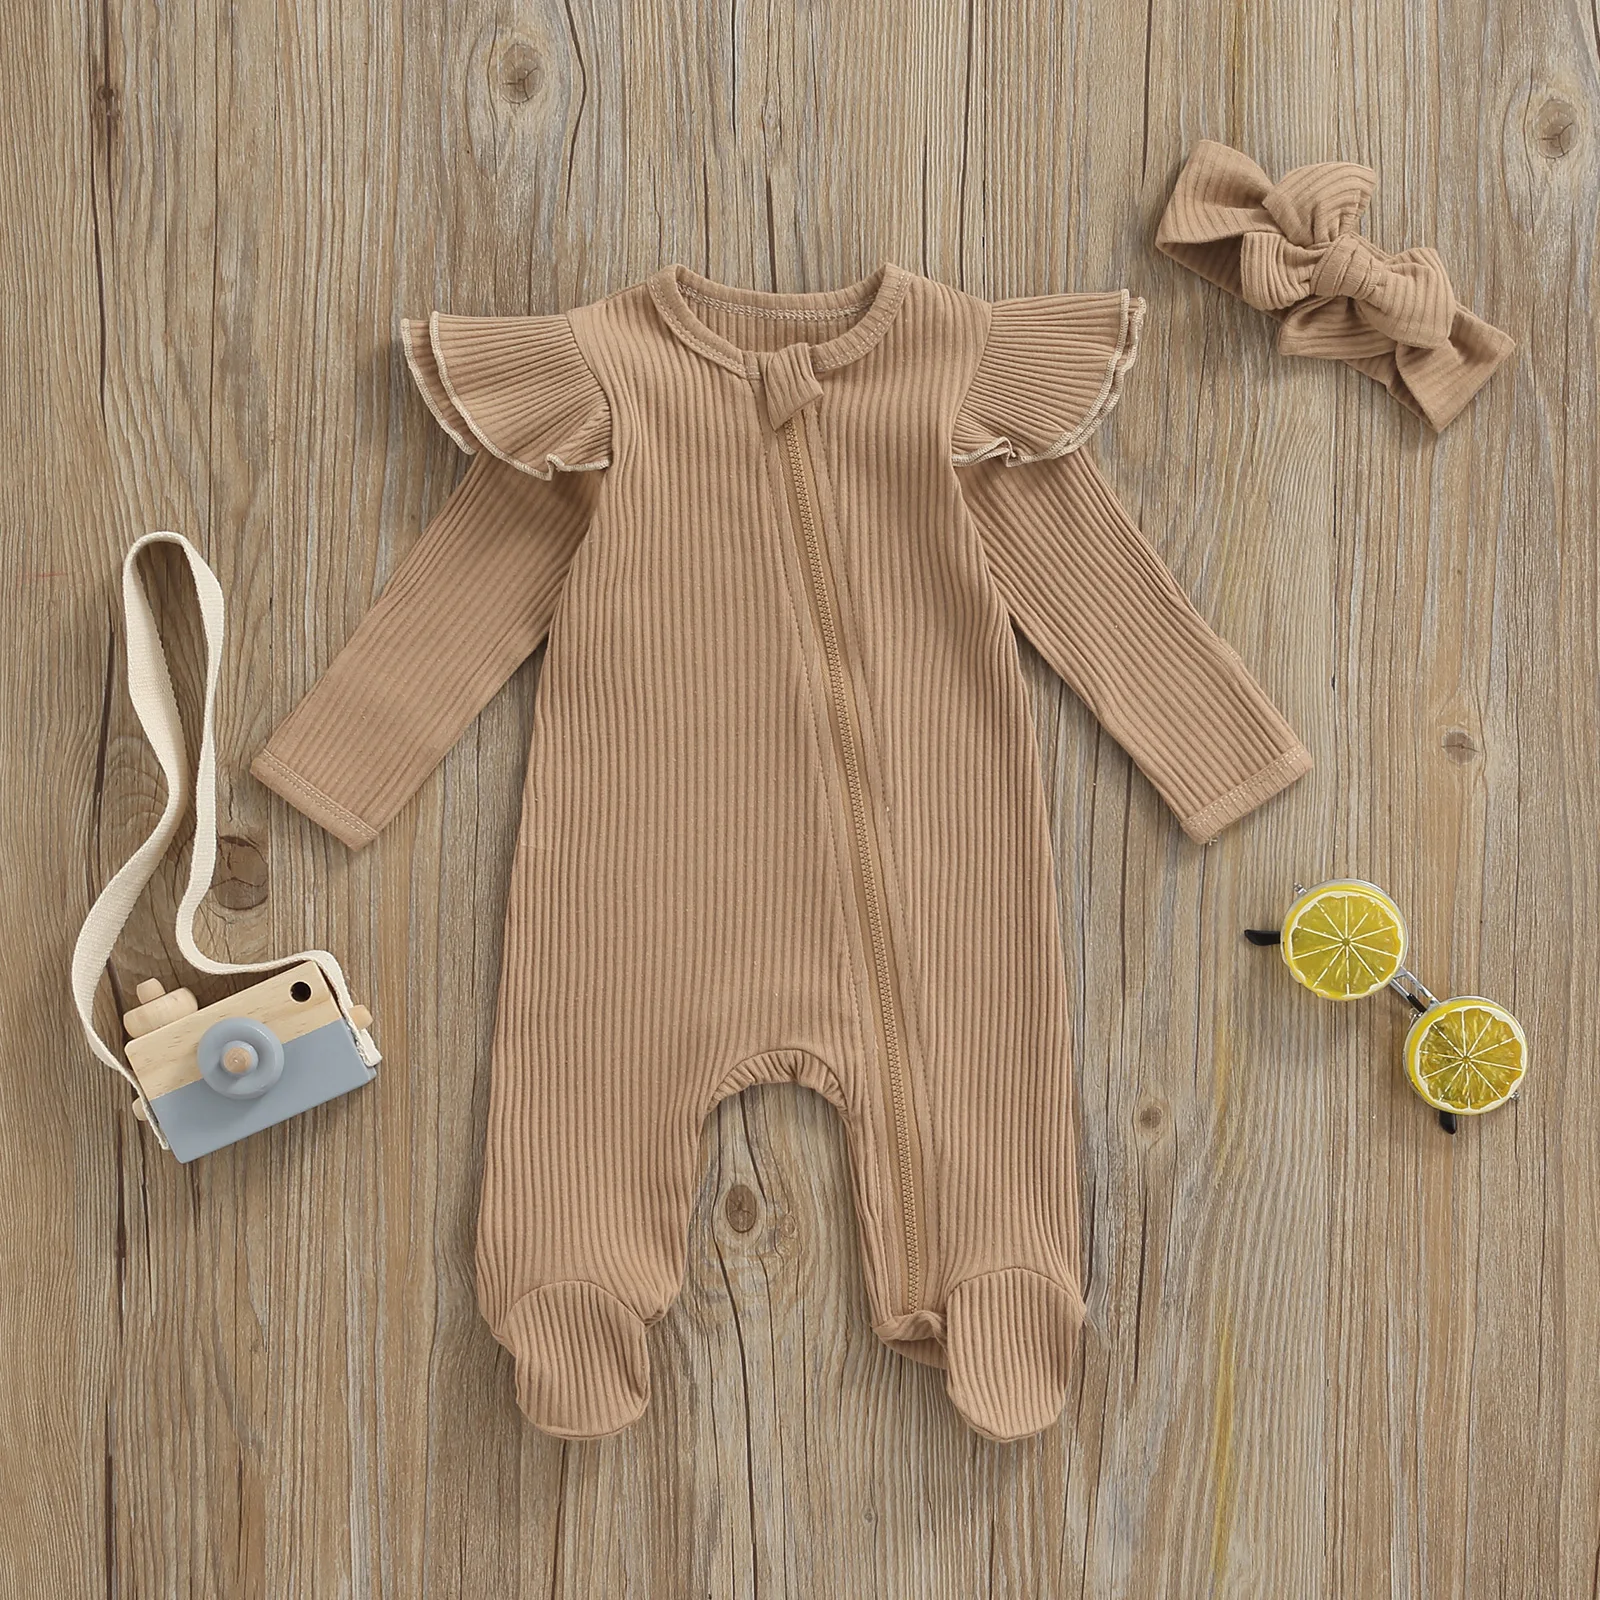 Ma&Baby 0-6M Newborn Infant Baby Girls Jumpsuit Knitted Soft Ruffles Long Sleeve Romper Playsuit Autumn Spring Baby Clothing D35 cute baby bodysuits